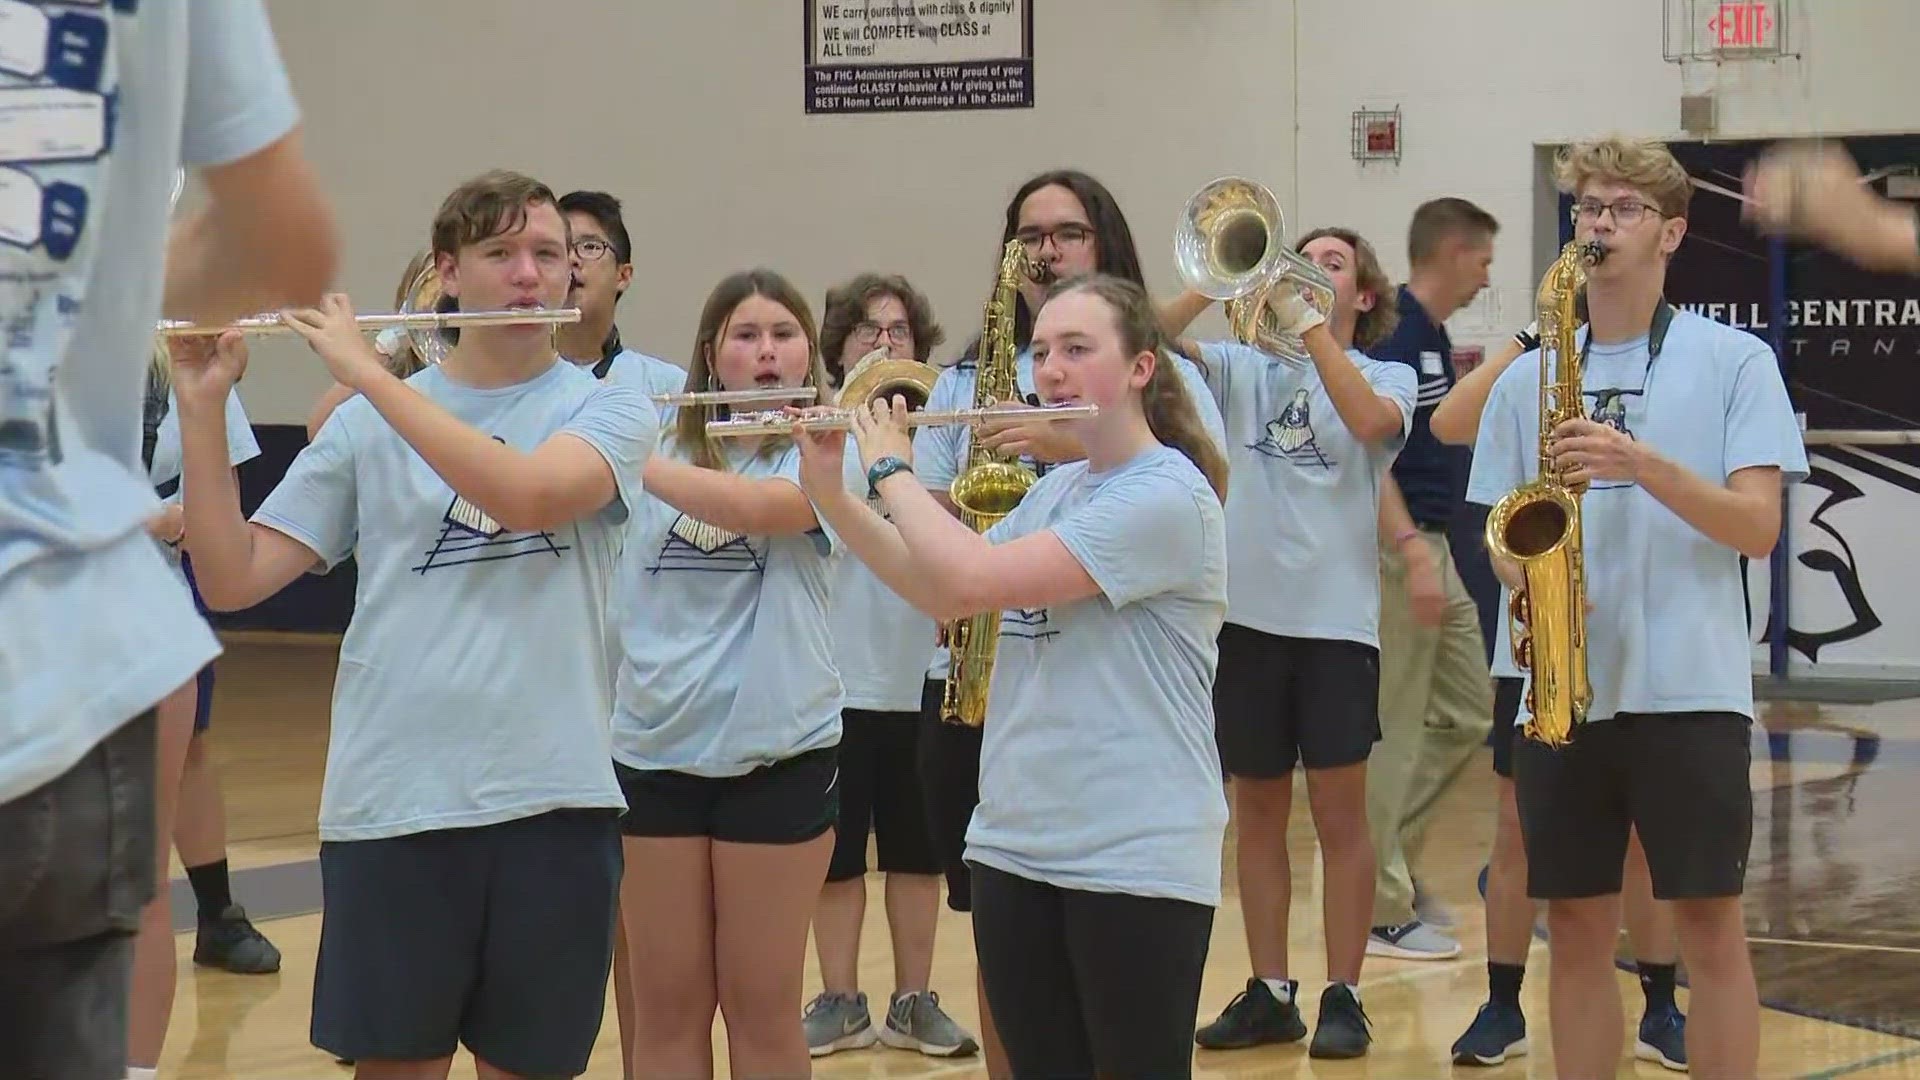 Today in St. Louis was live Monday morning at Francis Howell Central High School. Principal Suzanne Leake talked about the new year, and students performed.